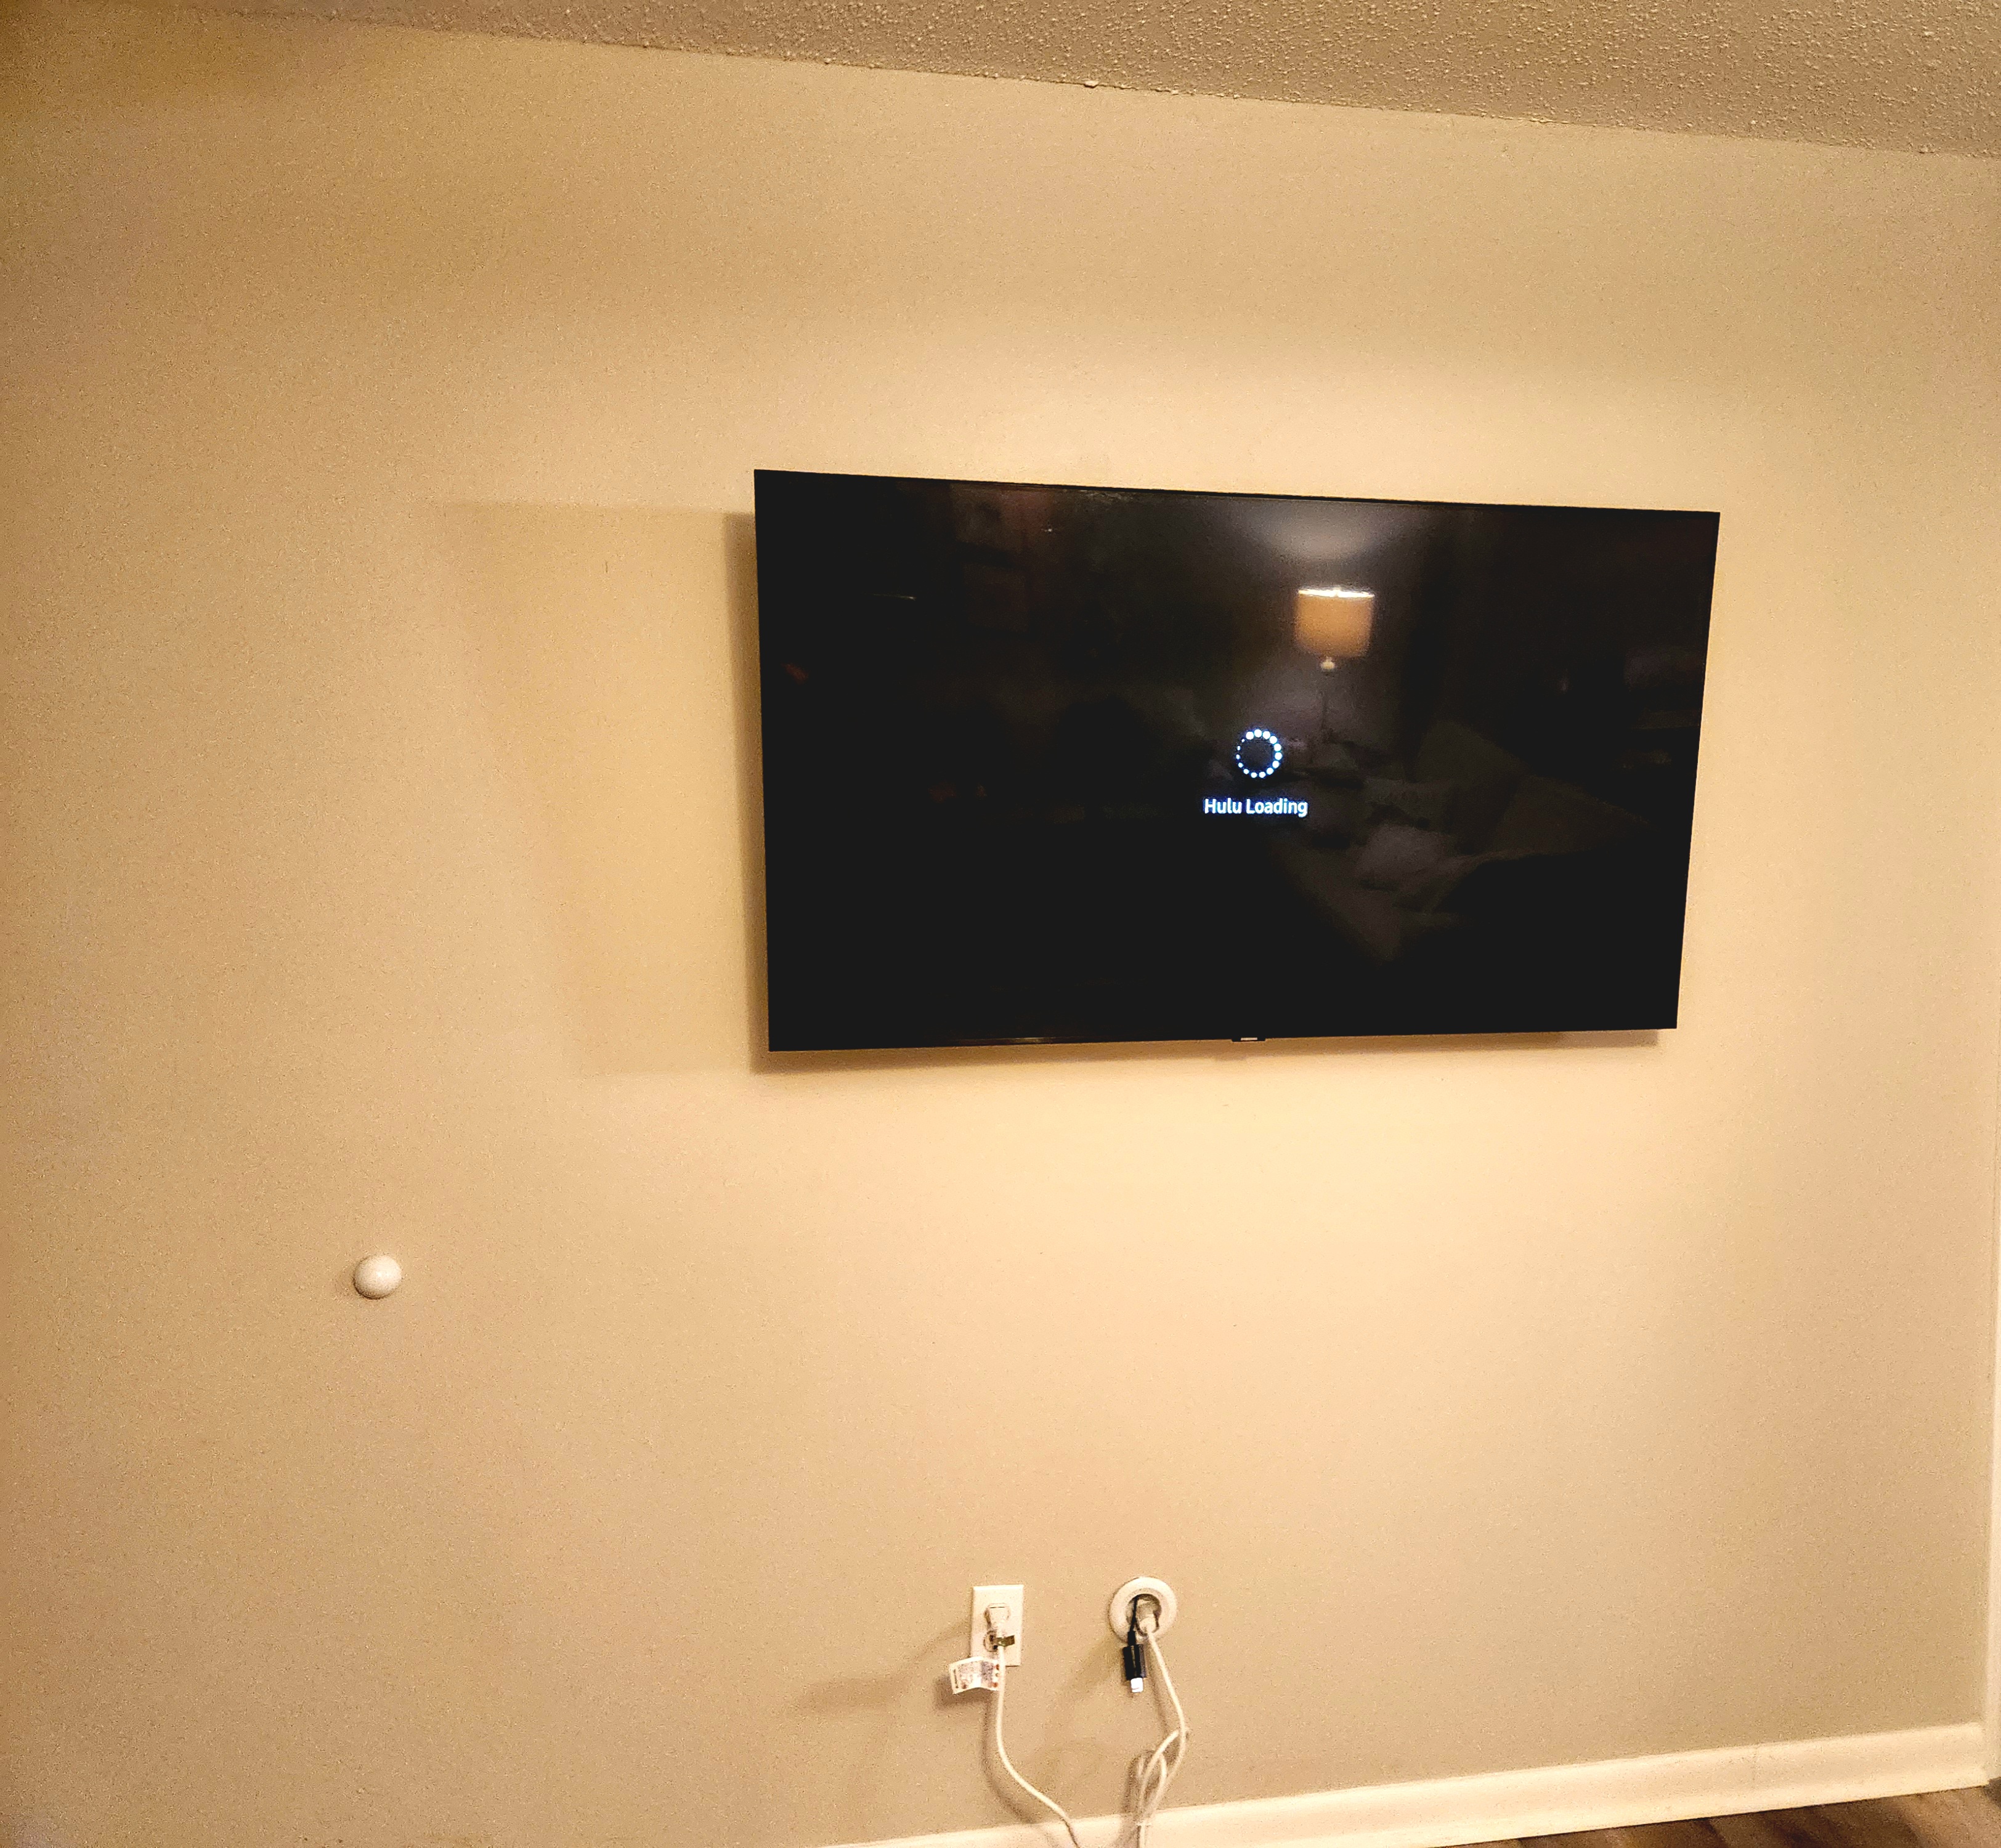 TV mounted on the wall with the cords hidden in the wall.